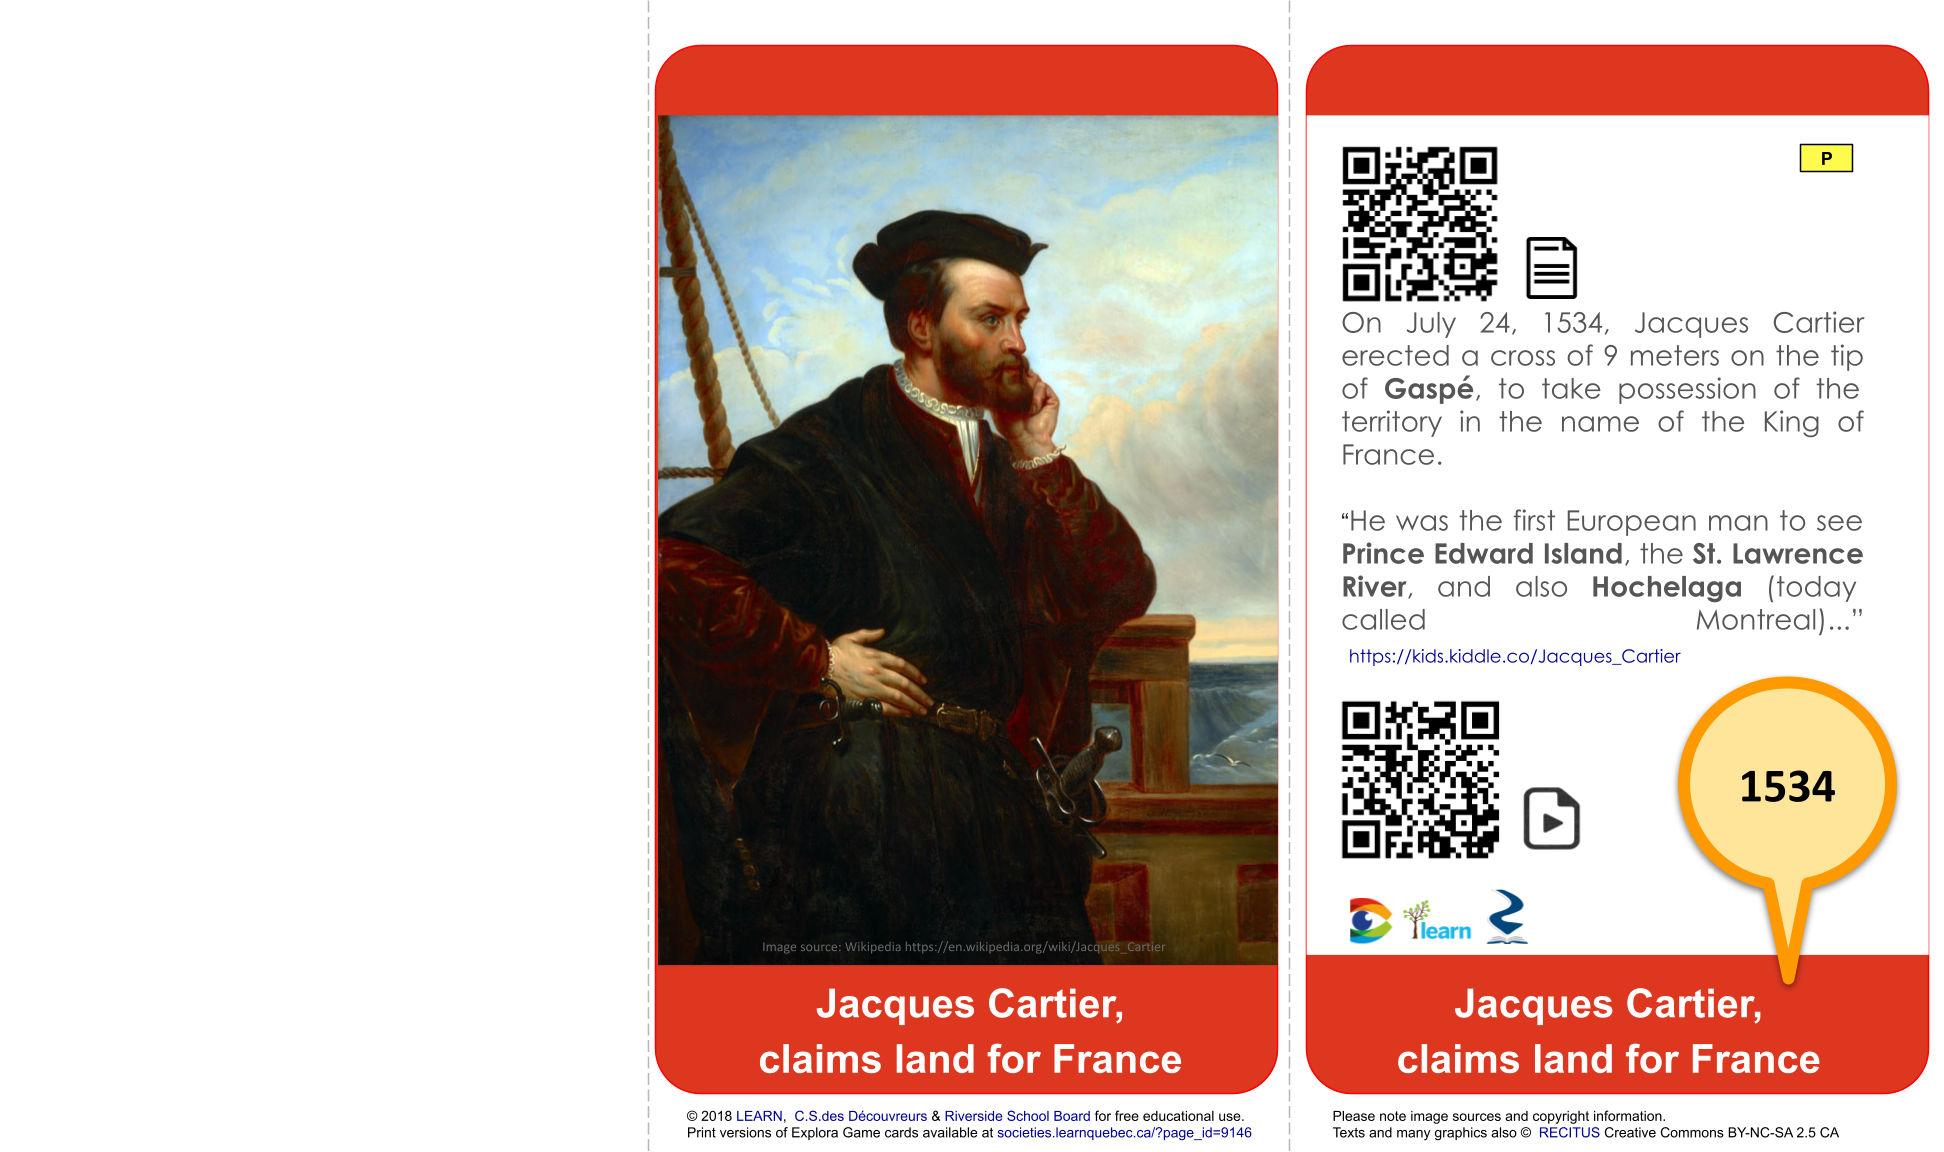 1534 Jacques Cartier claims land for France